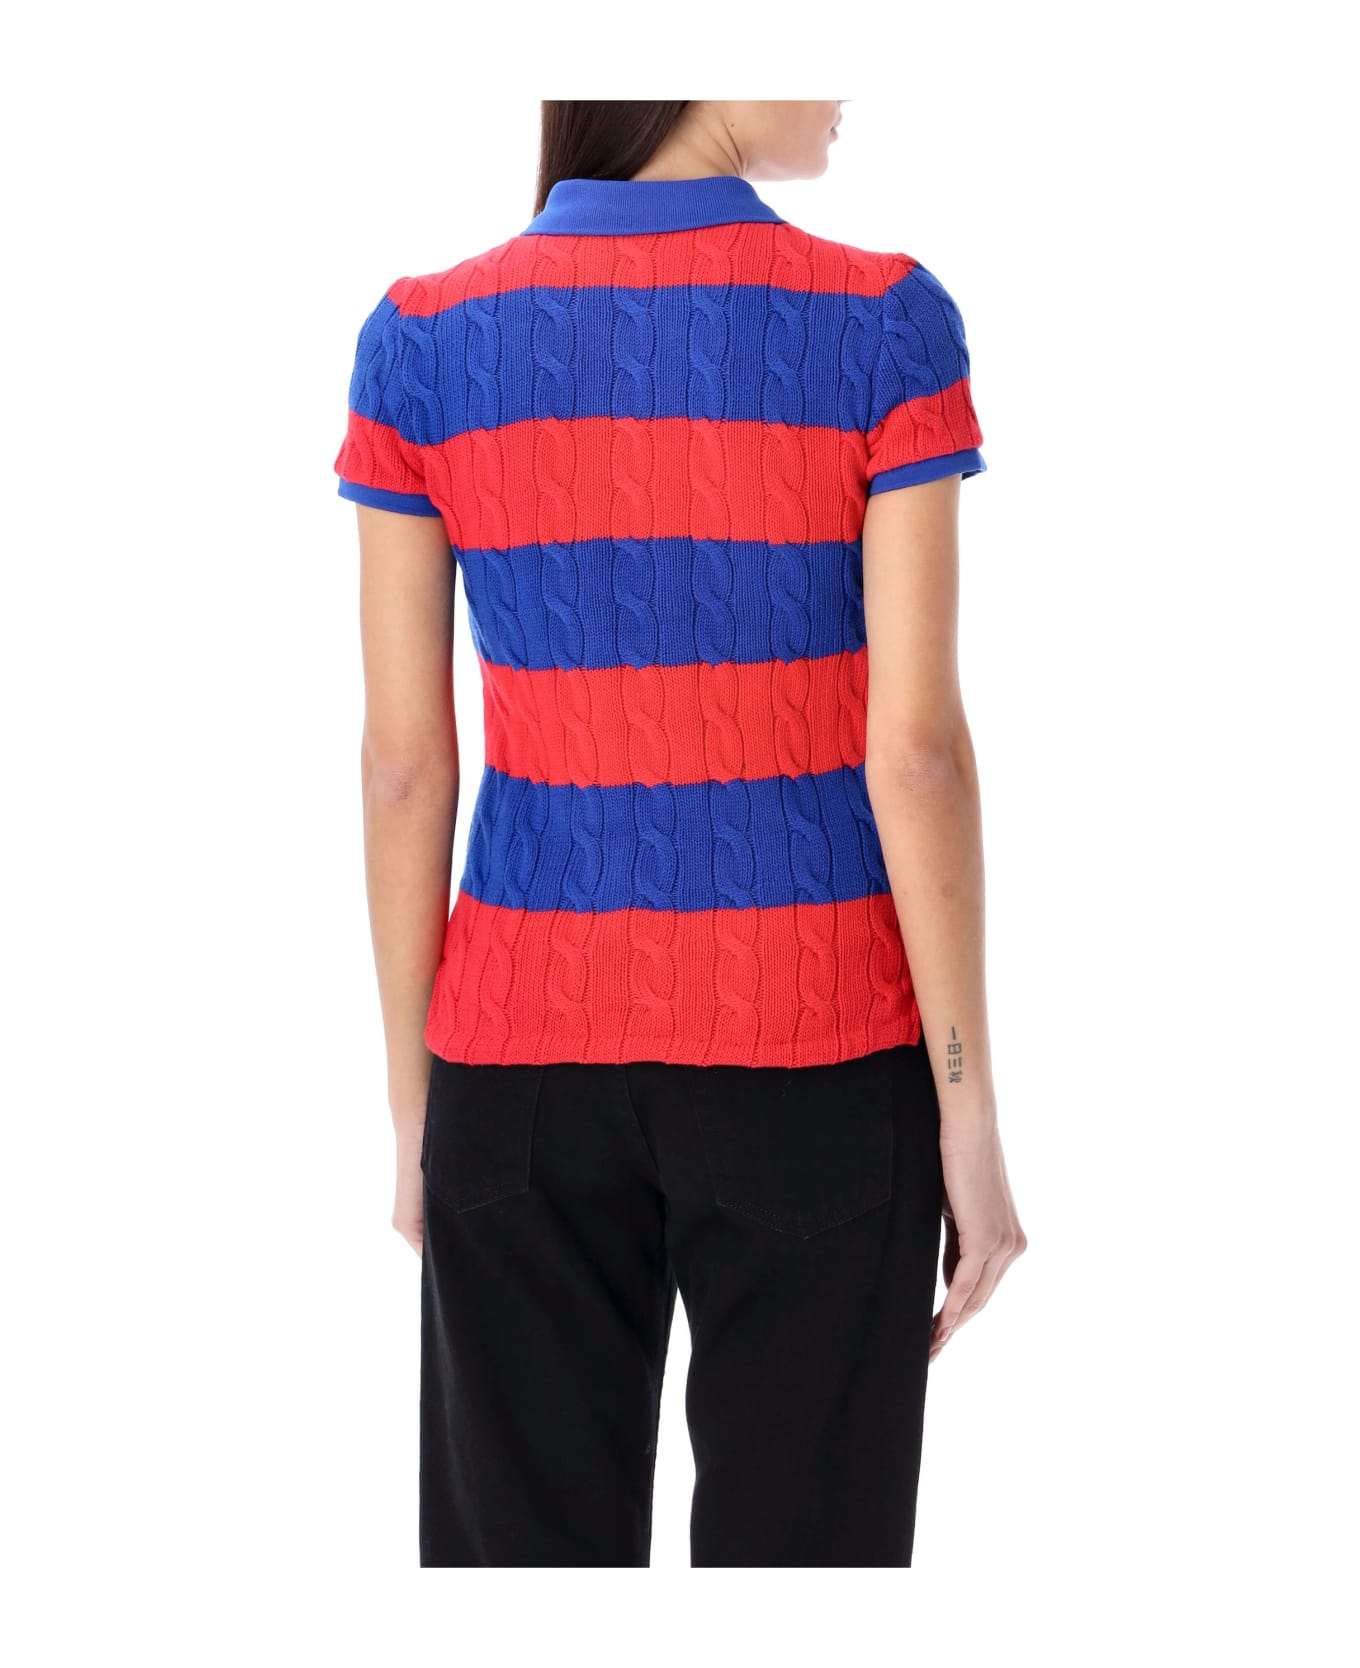 Polo Ralph Lauren Cotton Cable Knit Striped Polo Shirt - RED BLUE